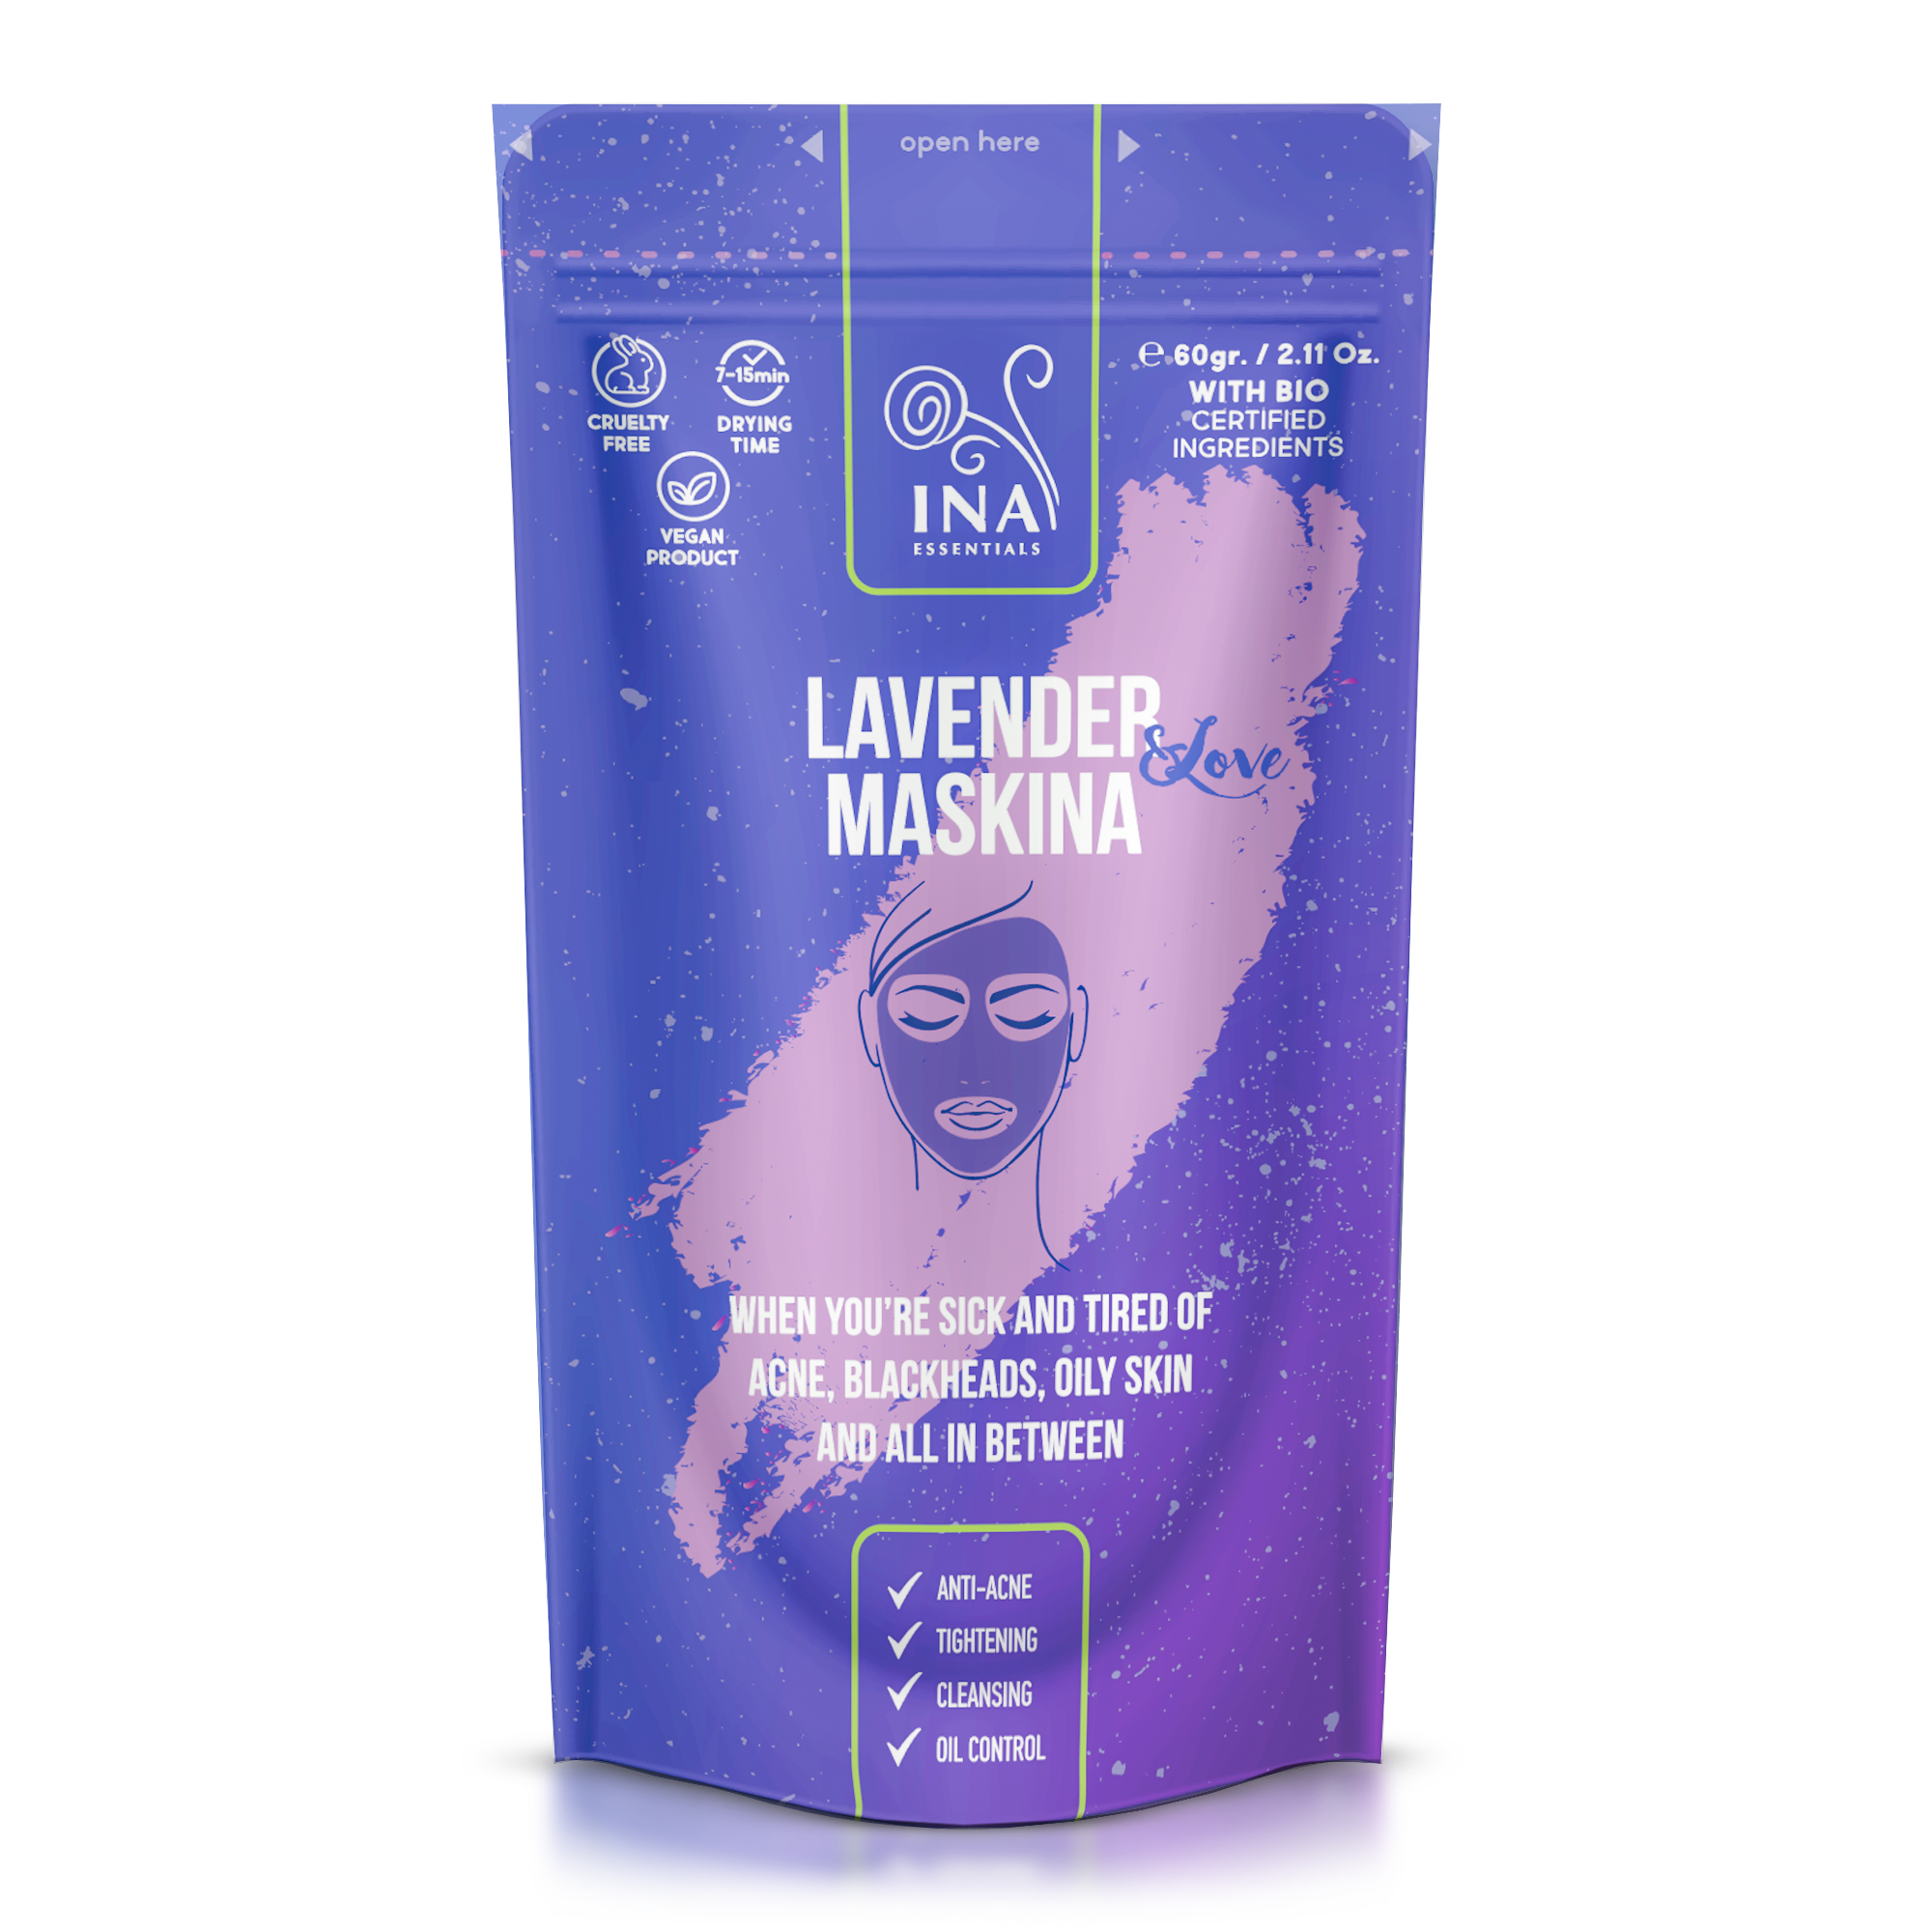 Shop Lavanya Face Mask for Glowing Skin from Quinta Essentia Organic